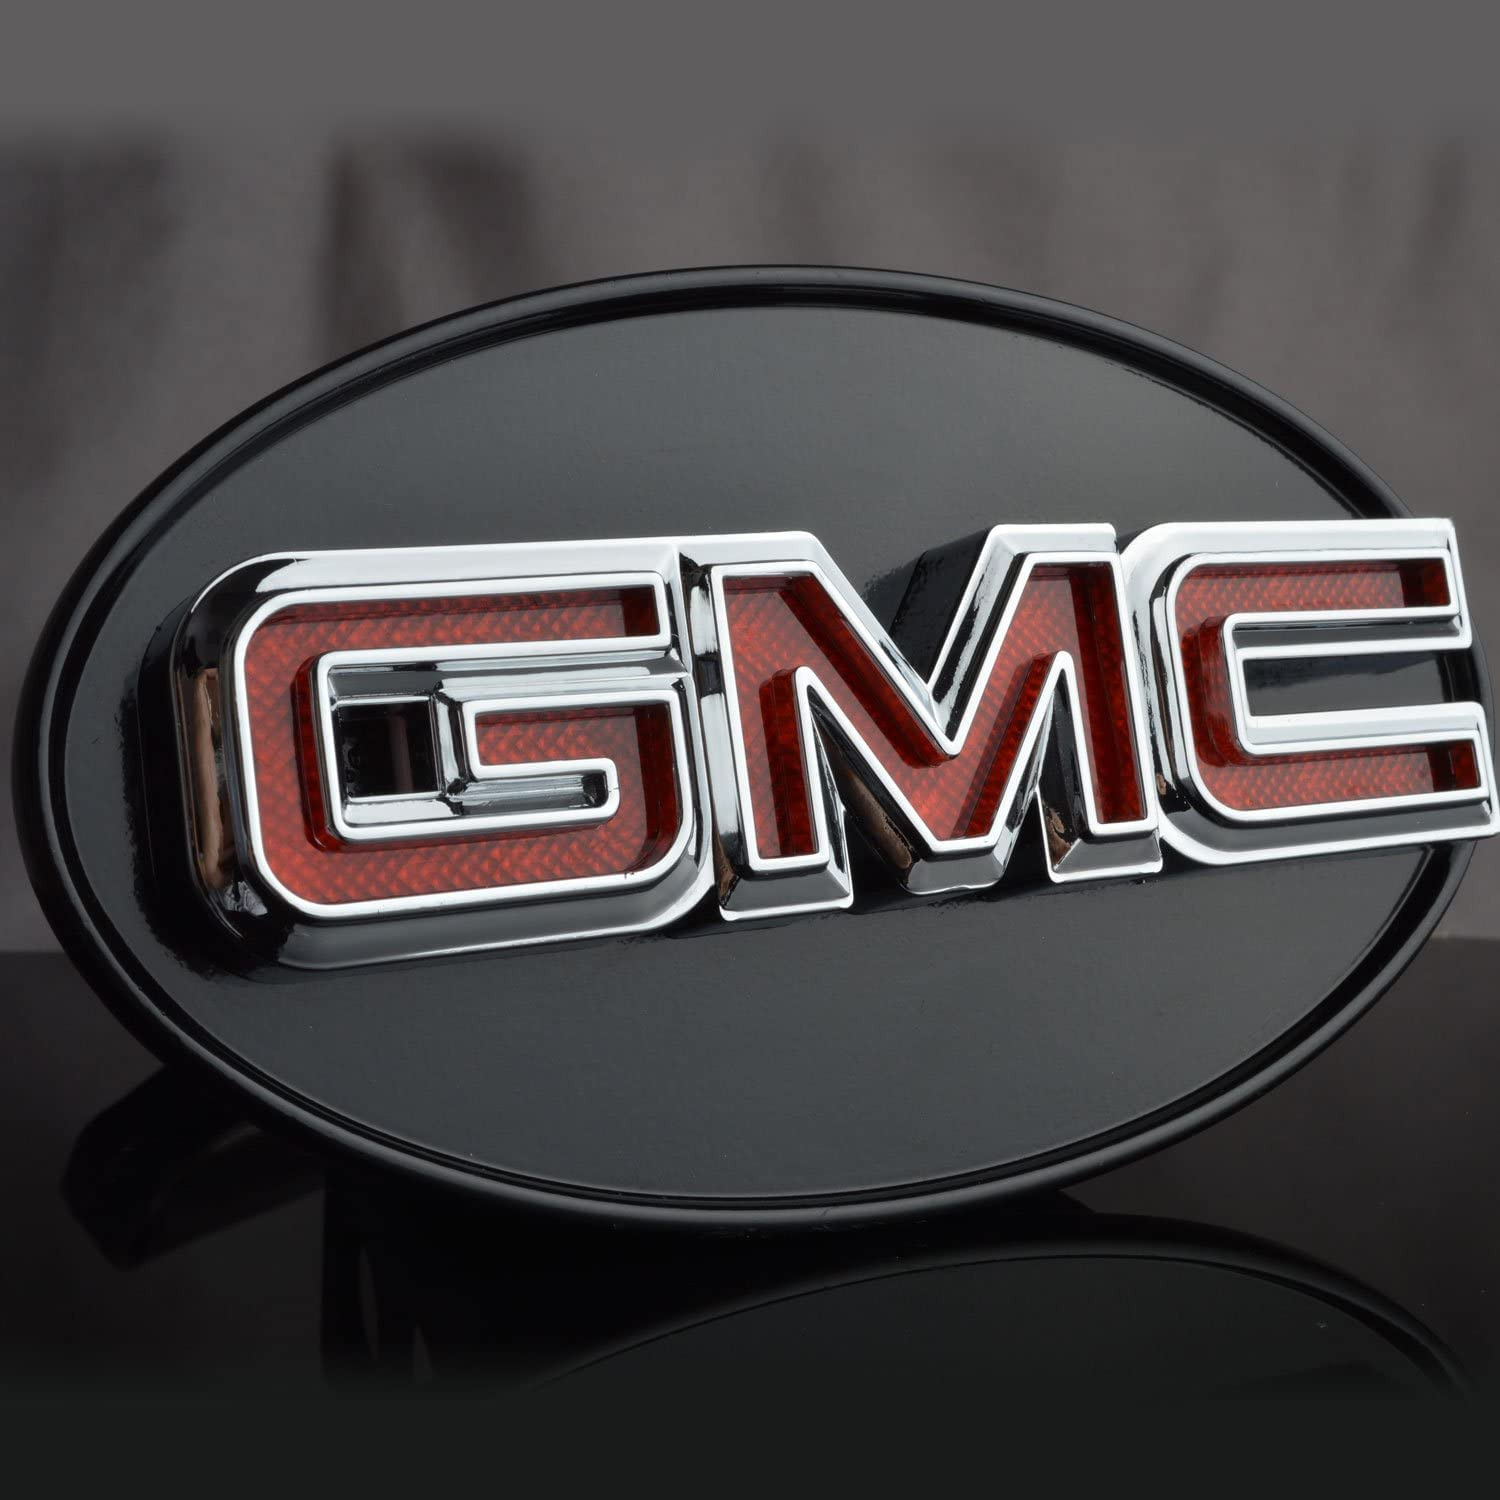 LED Light Hitch Receiver Covers Officially Licensed GMC Hitch Cover (Chrome)